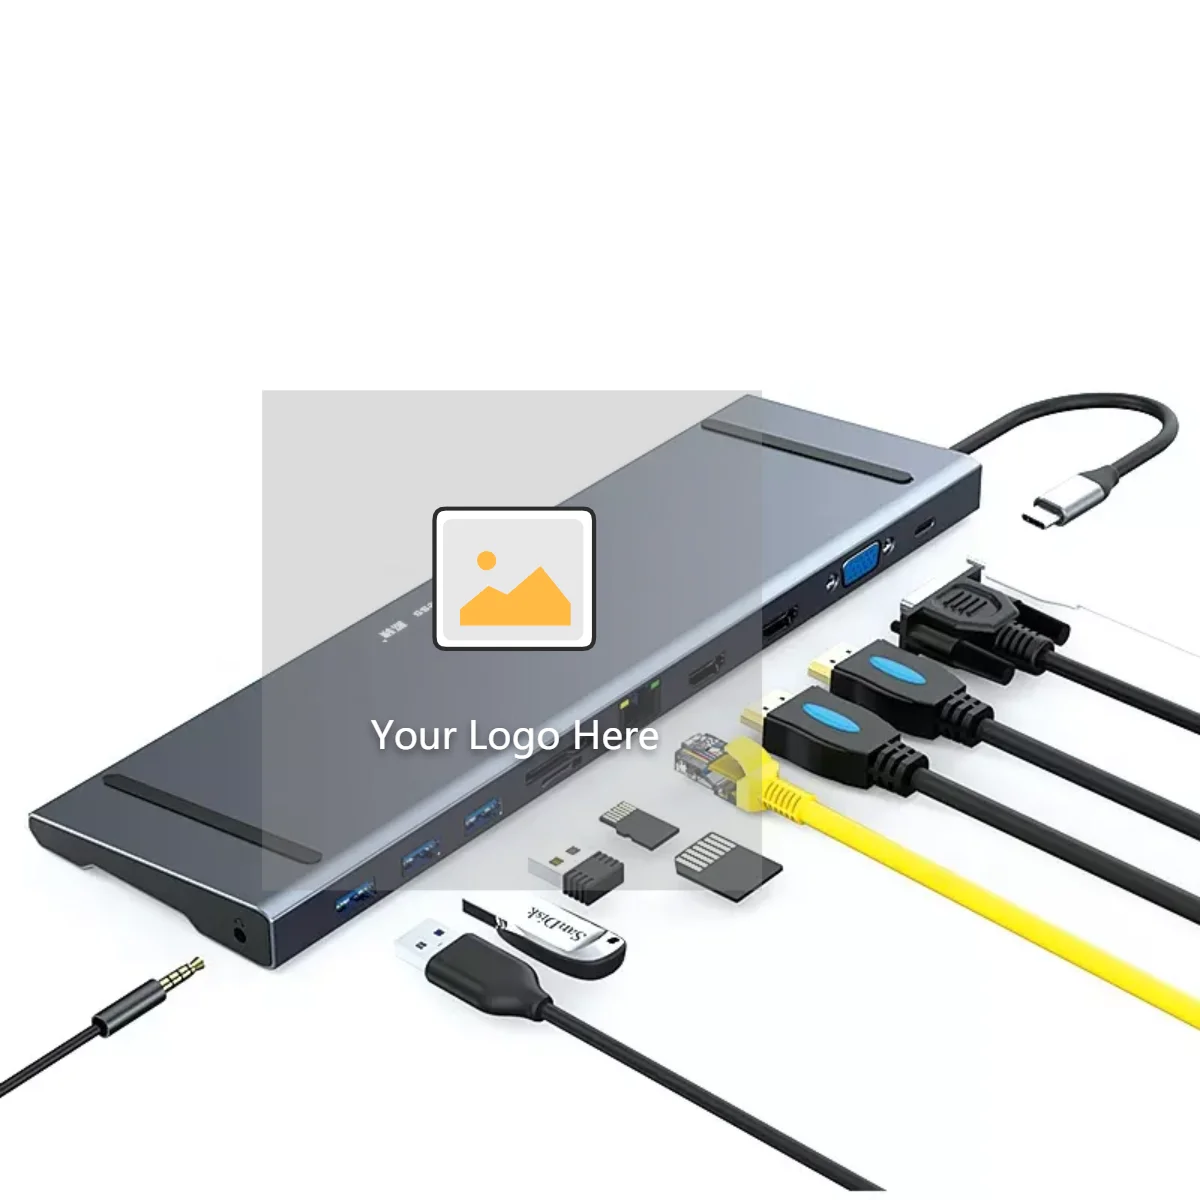 or Phone to a USB 3.0 Device Tablet Enables Connection of USB Type C Laptop Plugable USB C to USB Adapter Cable 20 cm 